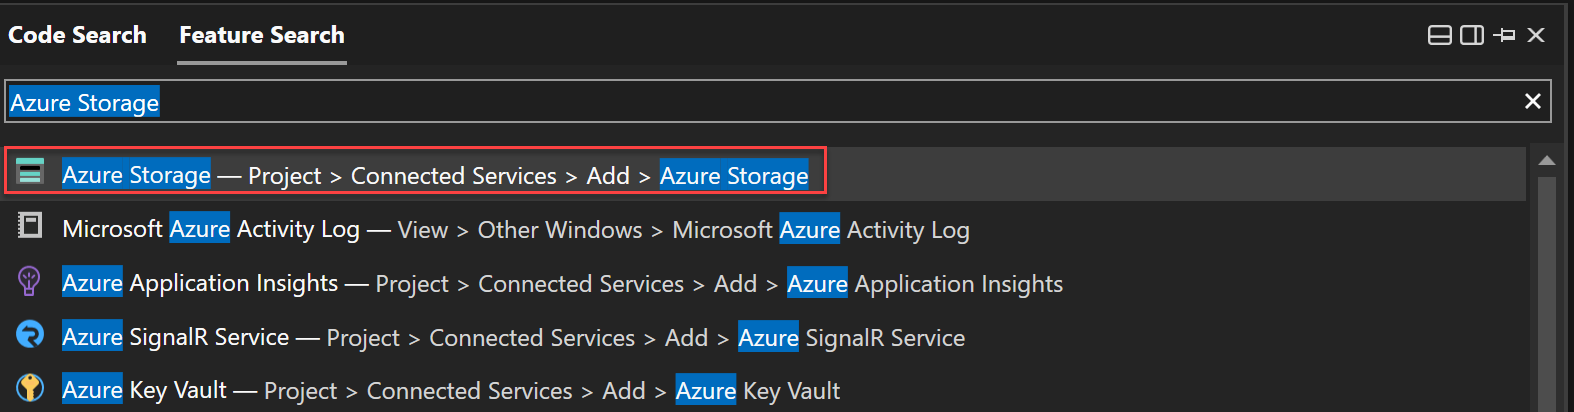 Screenshot of using Feature Search to search for Azure Storage.